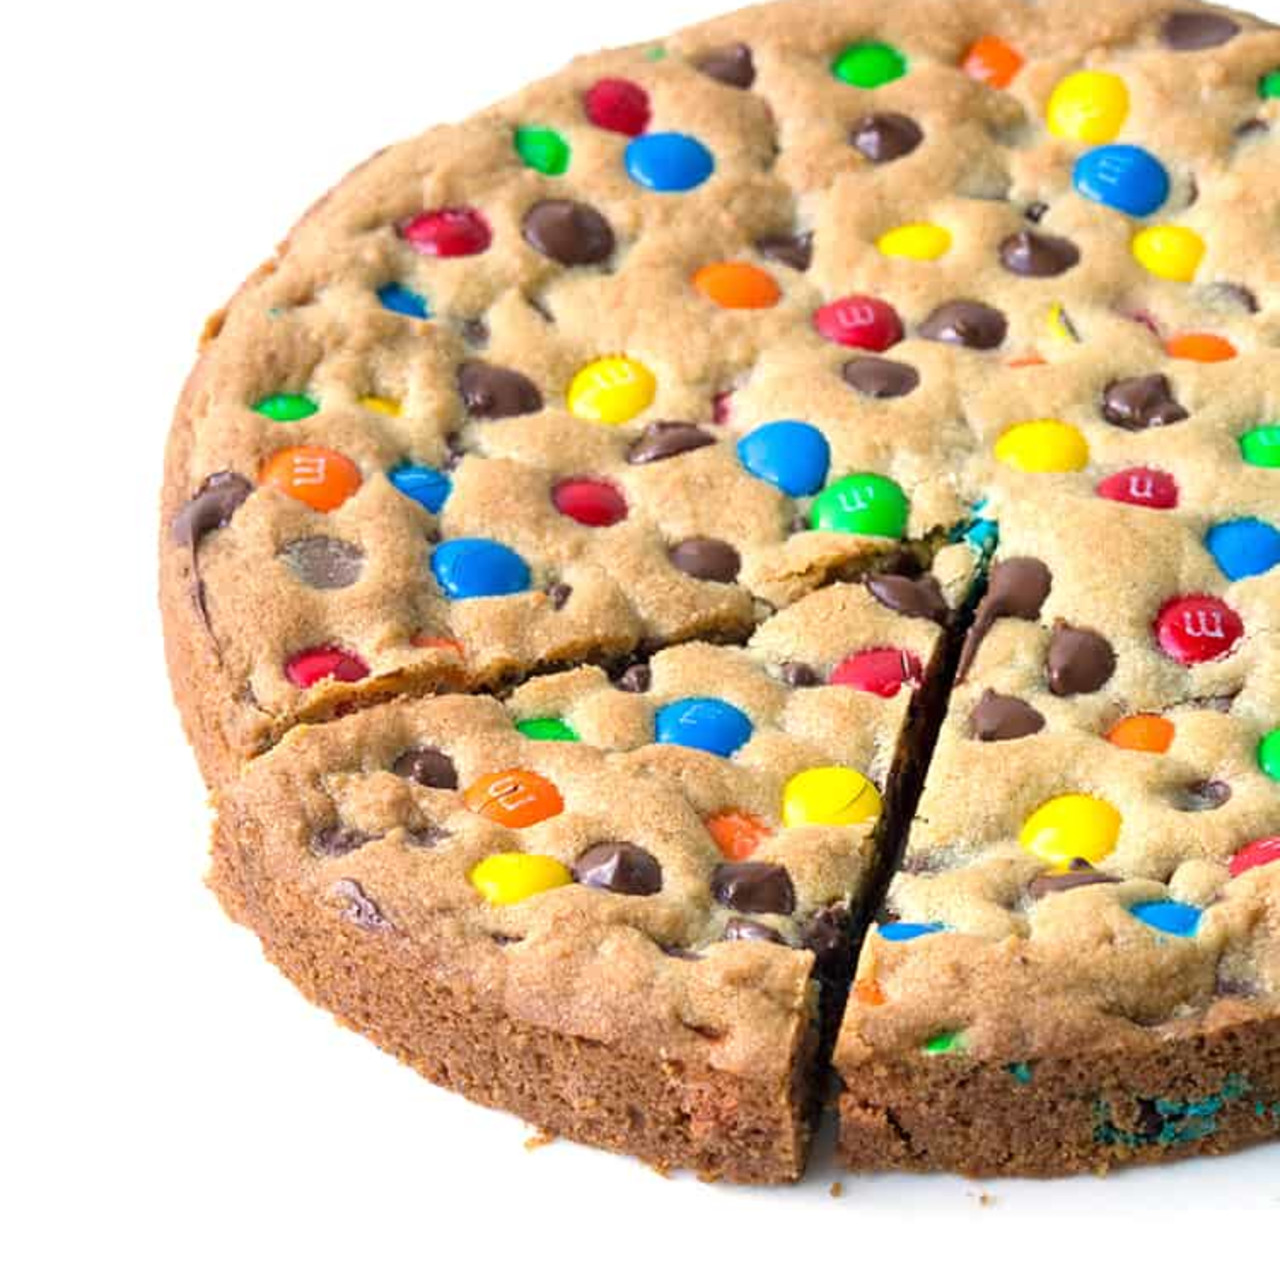 This M&M's Cookie-Baking Kit Comes With a Skillet for the Best $6 Dessert